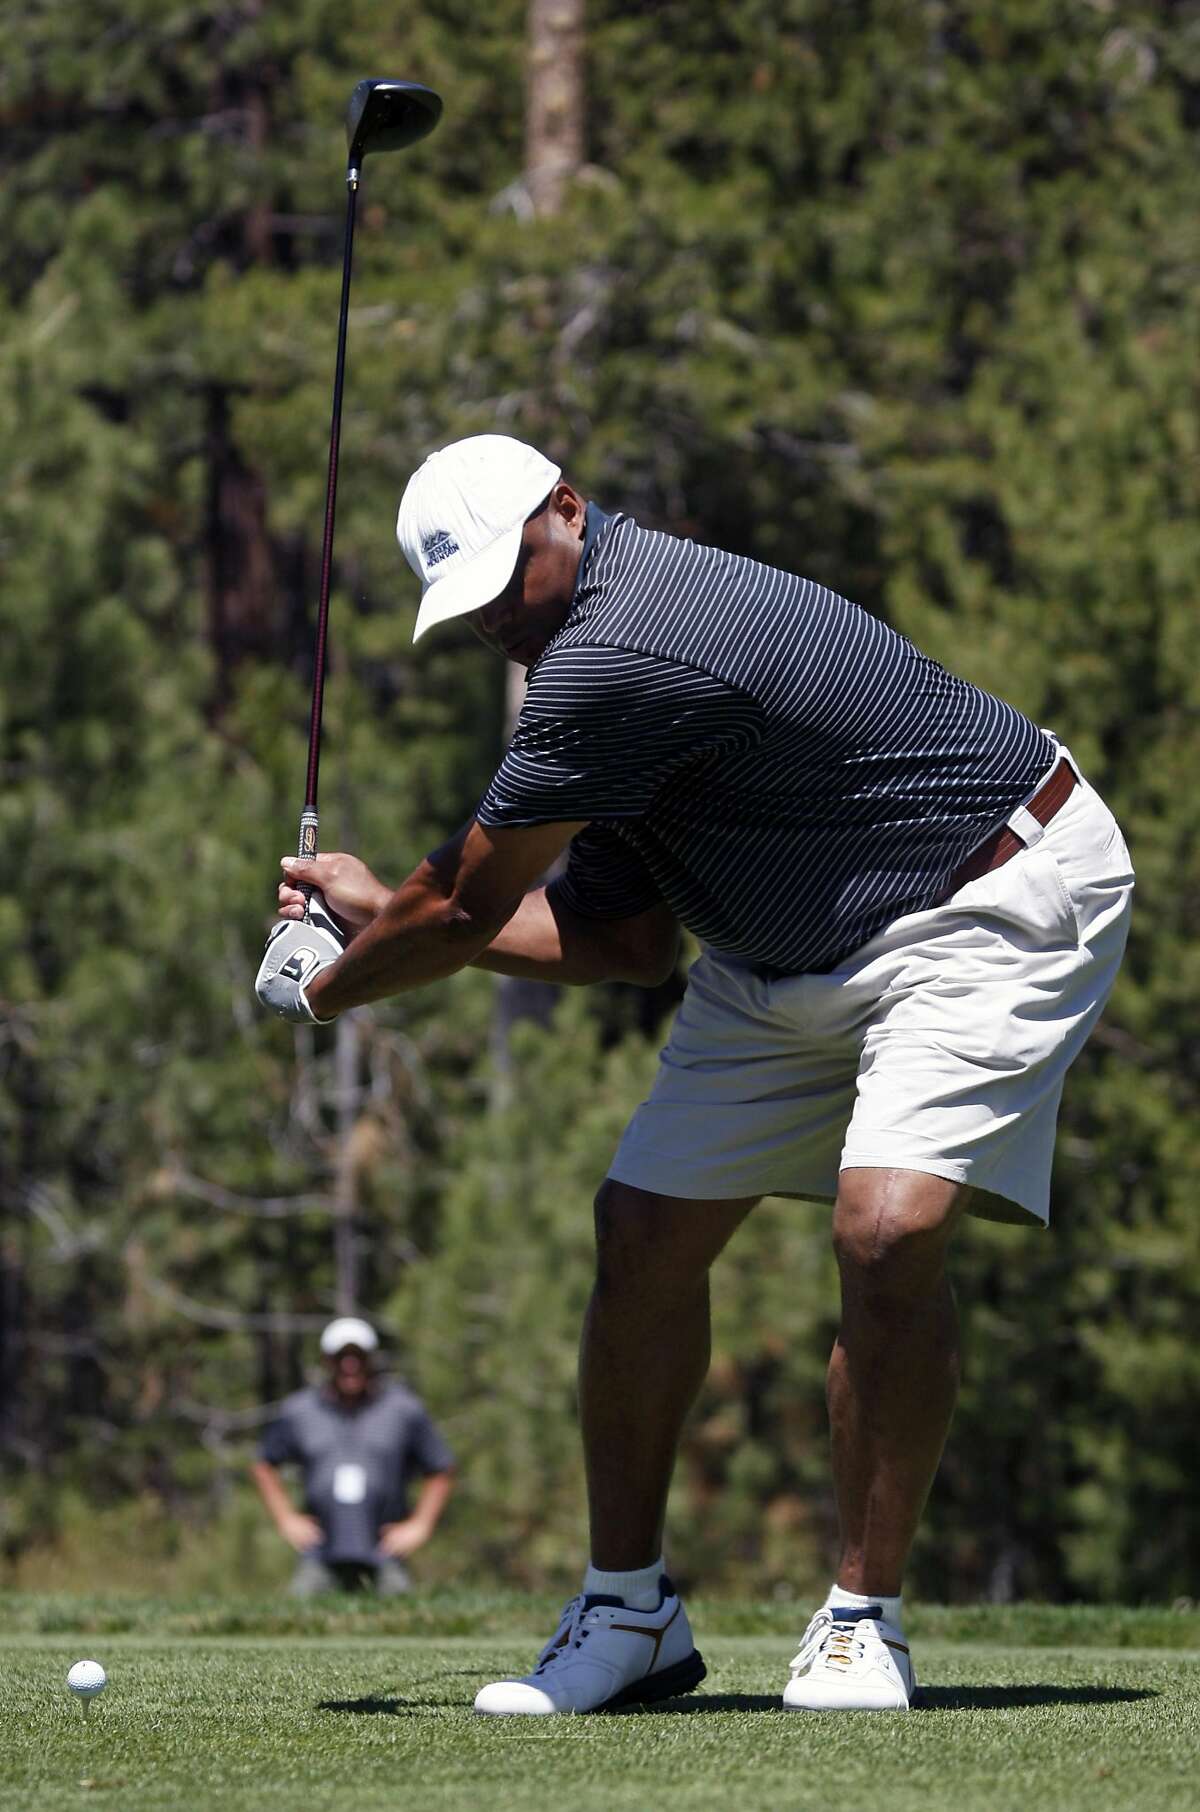 Charles Barkley, basketball Hall of Famer, NBA broadcaster, tees off on 18th at the 20th annual Celebrity Pro-Am American Century Championship at Edgewood Tahoe Golf Course. Thursday July 16, 2009